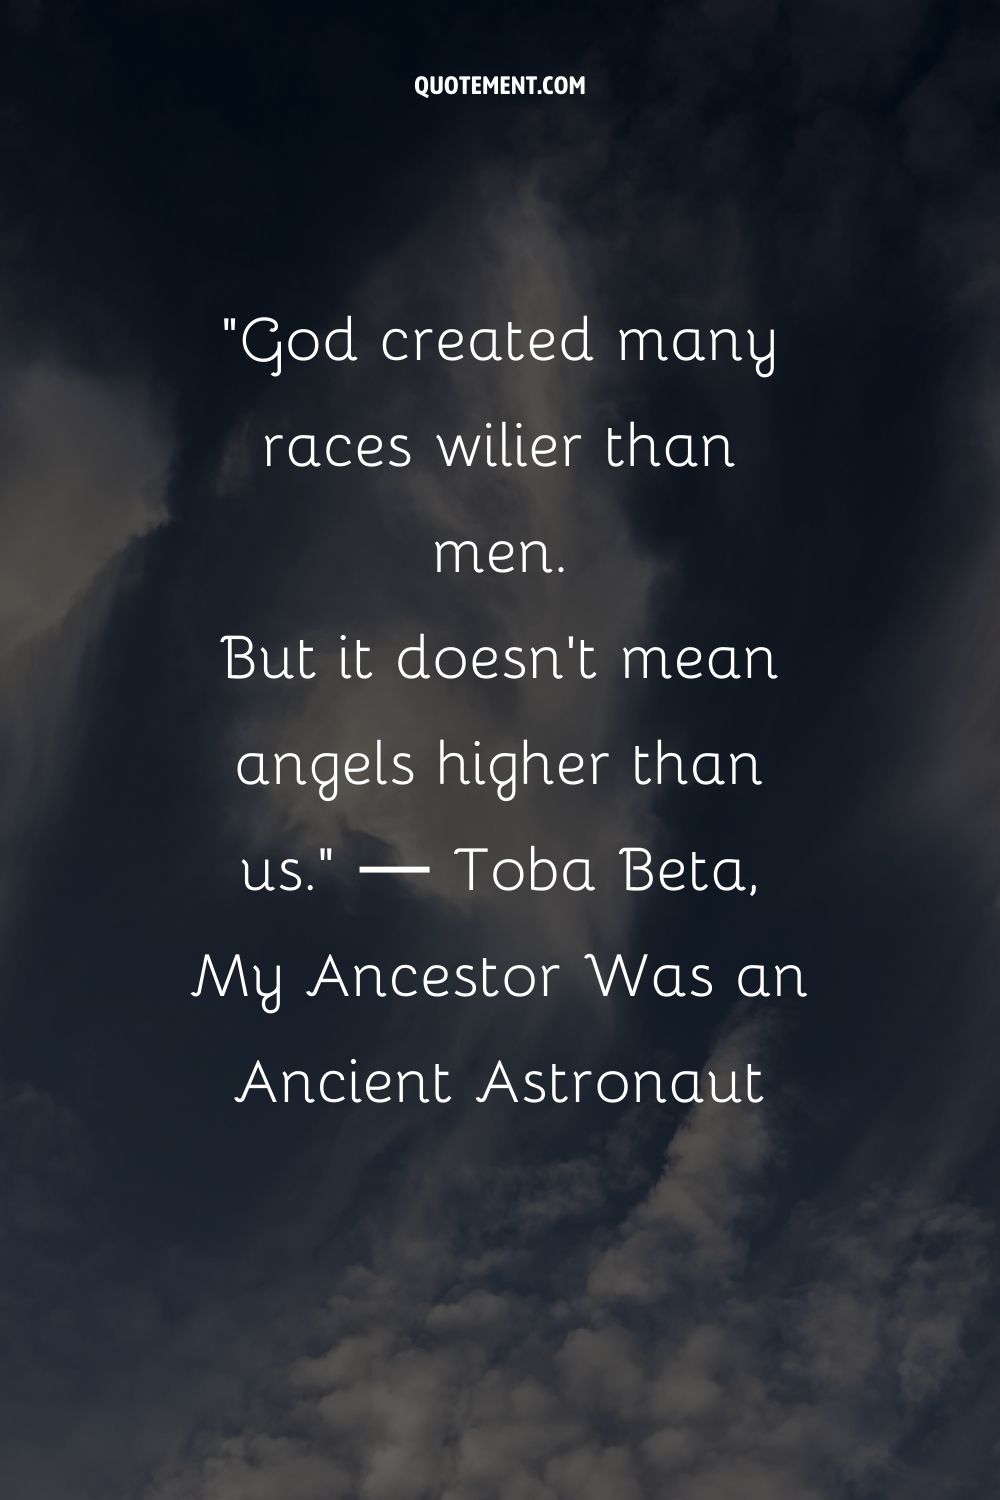 God created many races wilier than men.